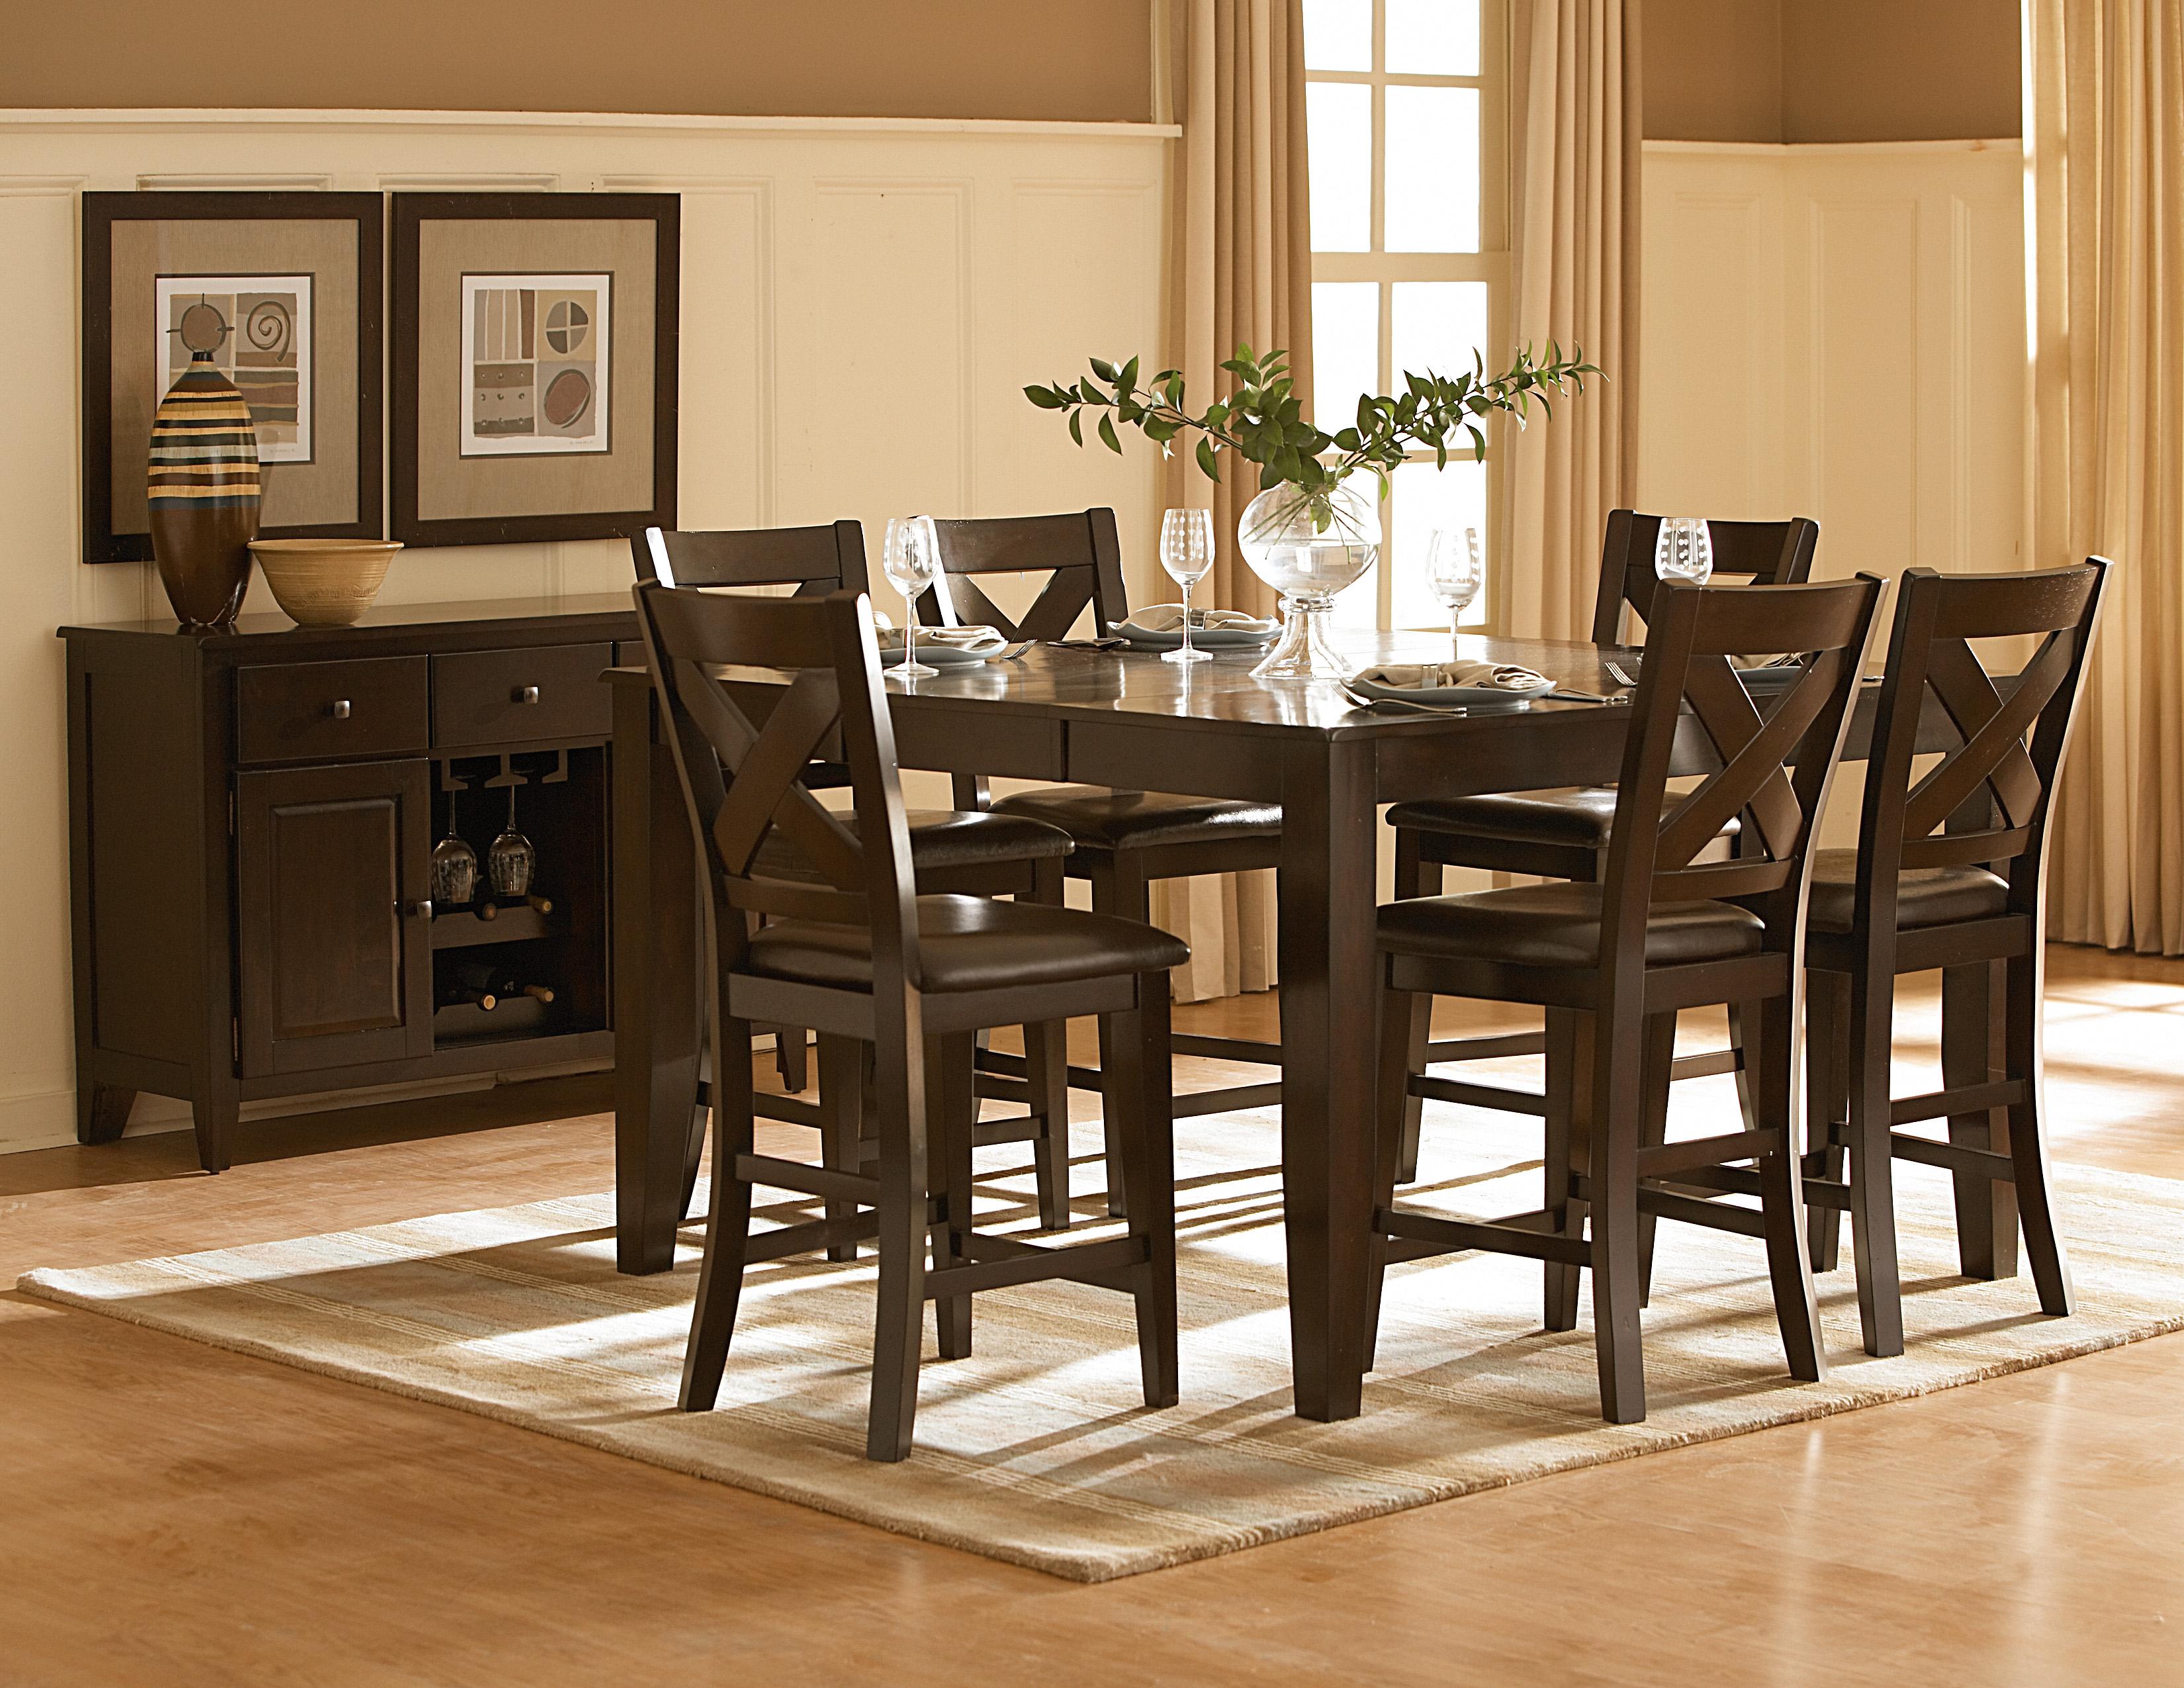 Casual Dining Room Set 1372-36*8PC Crown Point 1372-36*8PC in Merlot Faux Leather